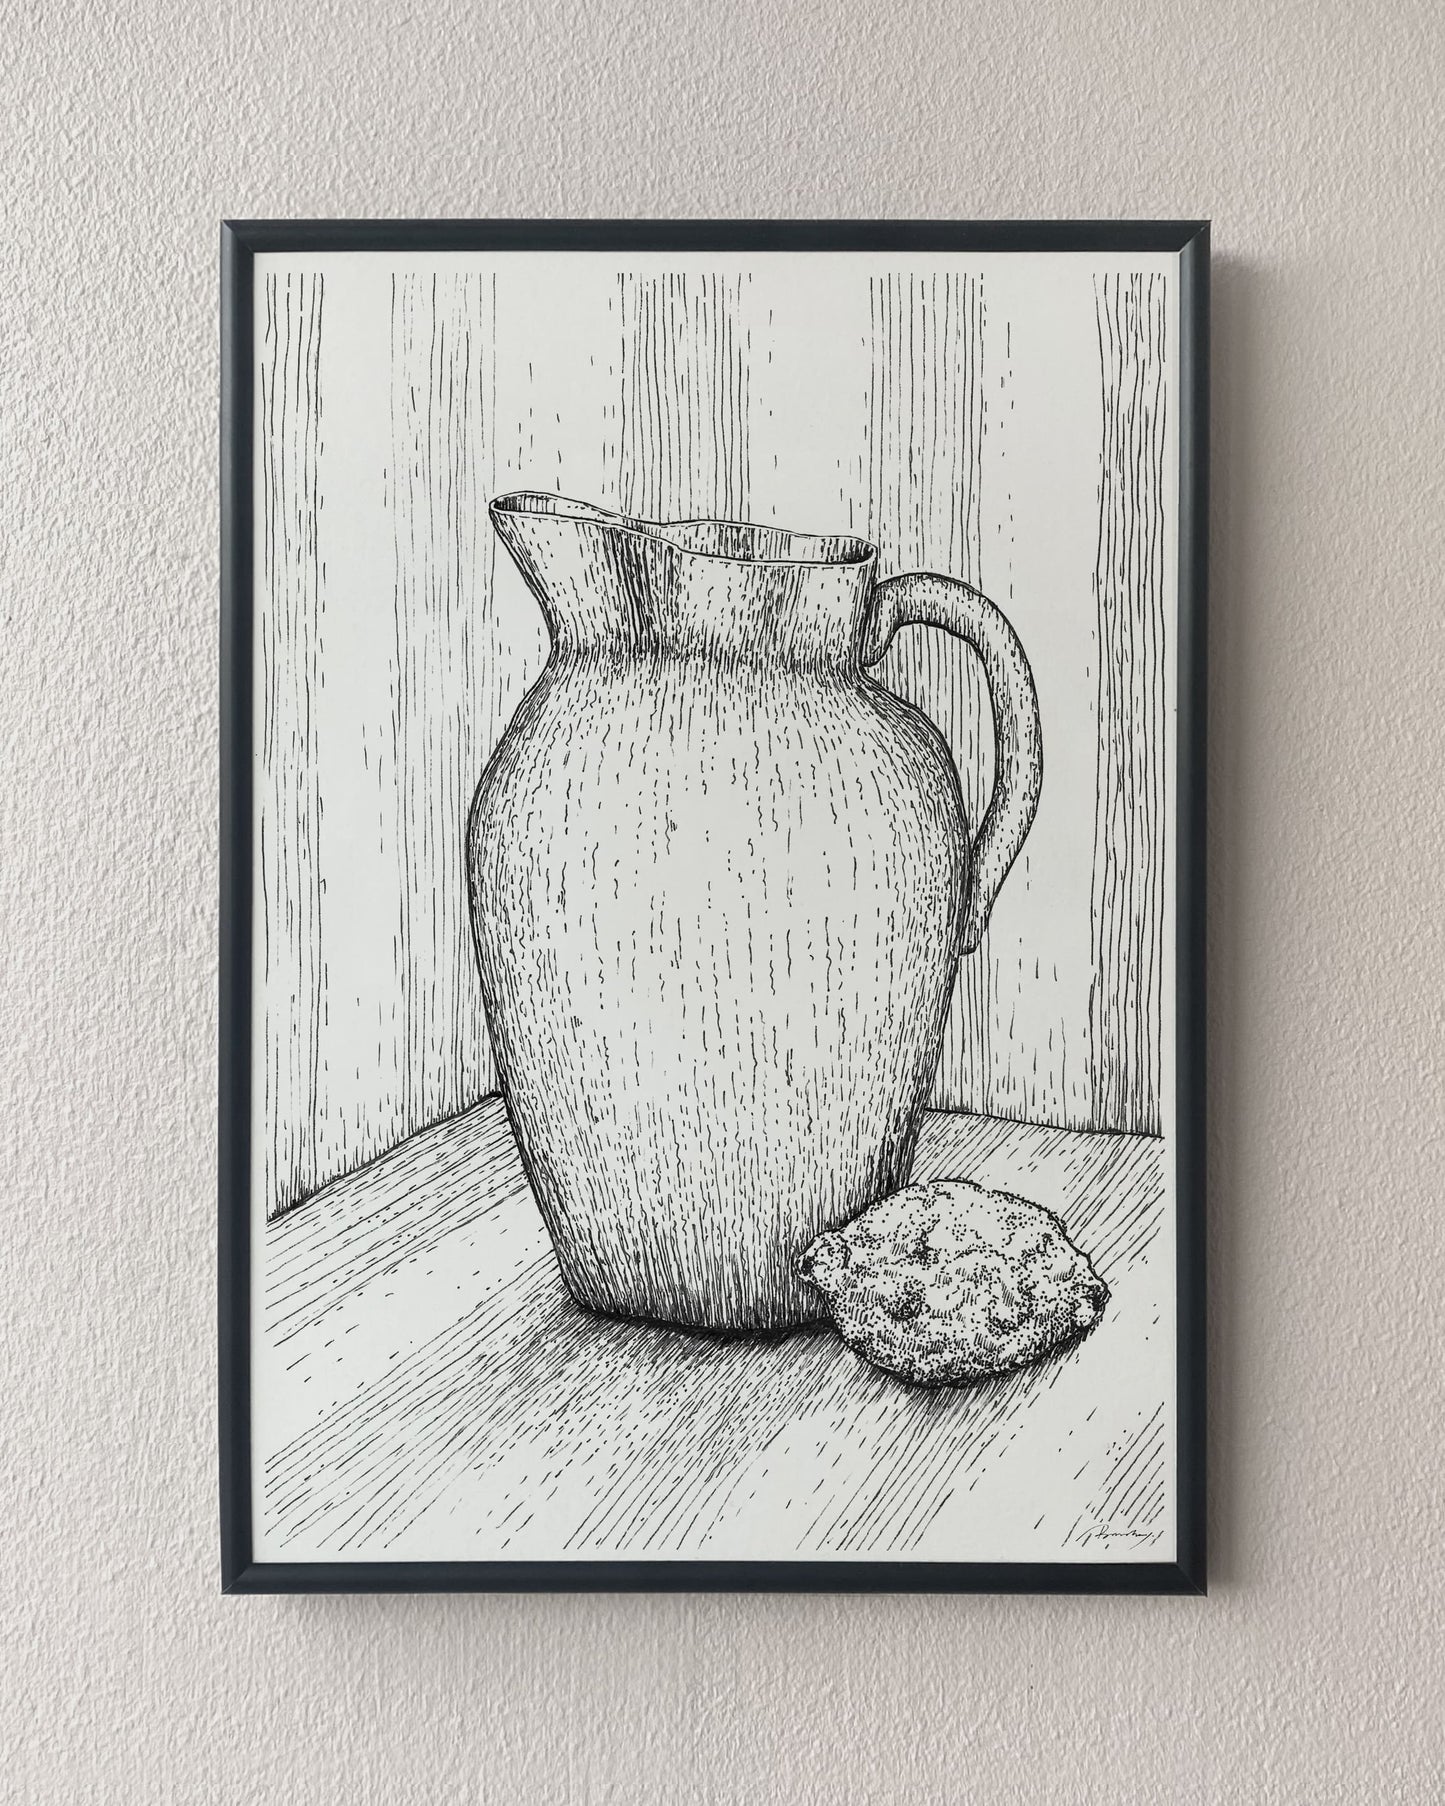 Lemonade. Exclusive kitchen posters. Premium quality art prints, printed on environmentally friendly FSC marked paper. 